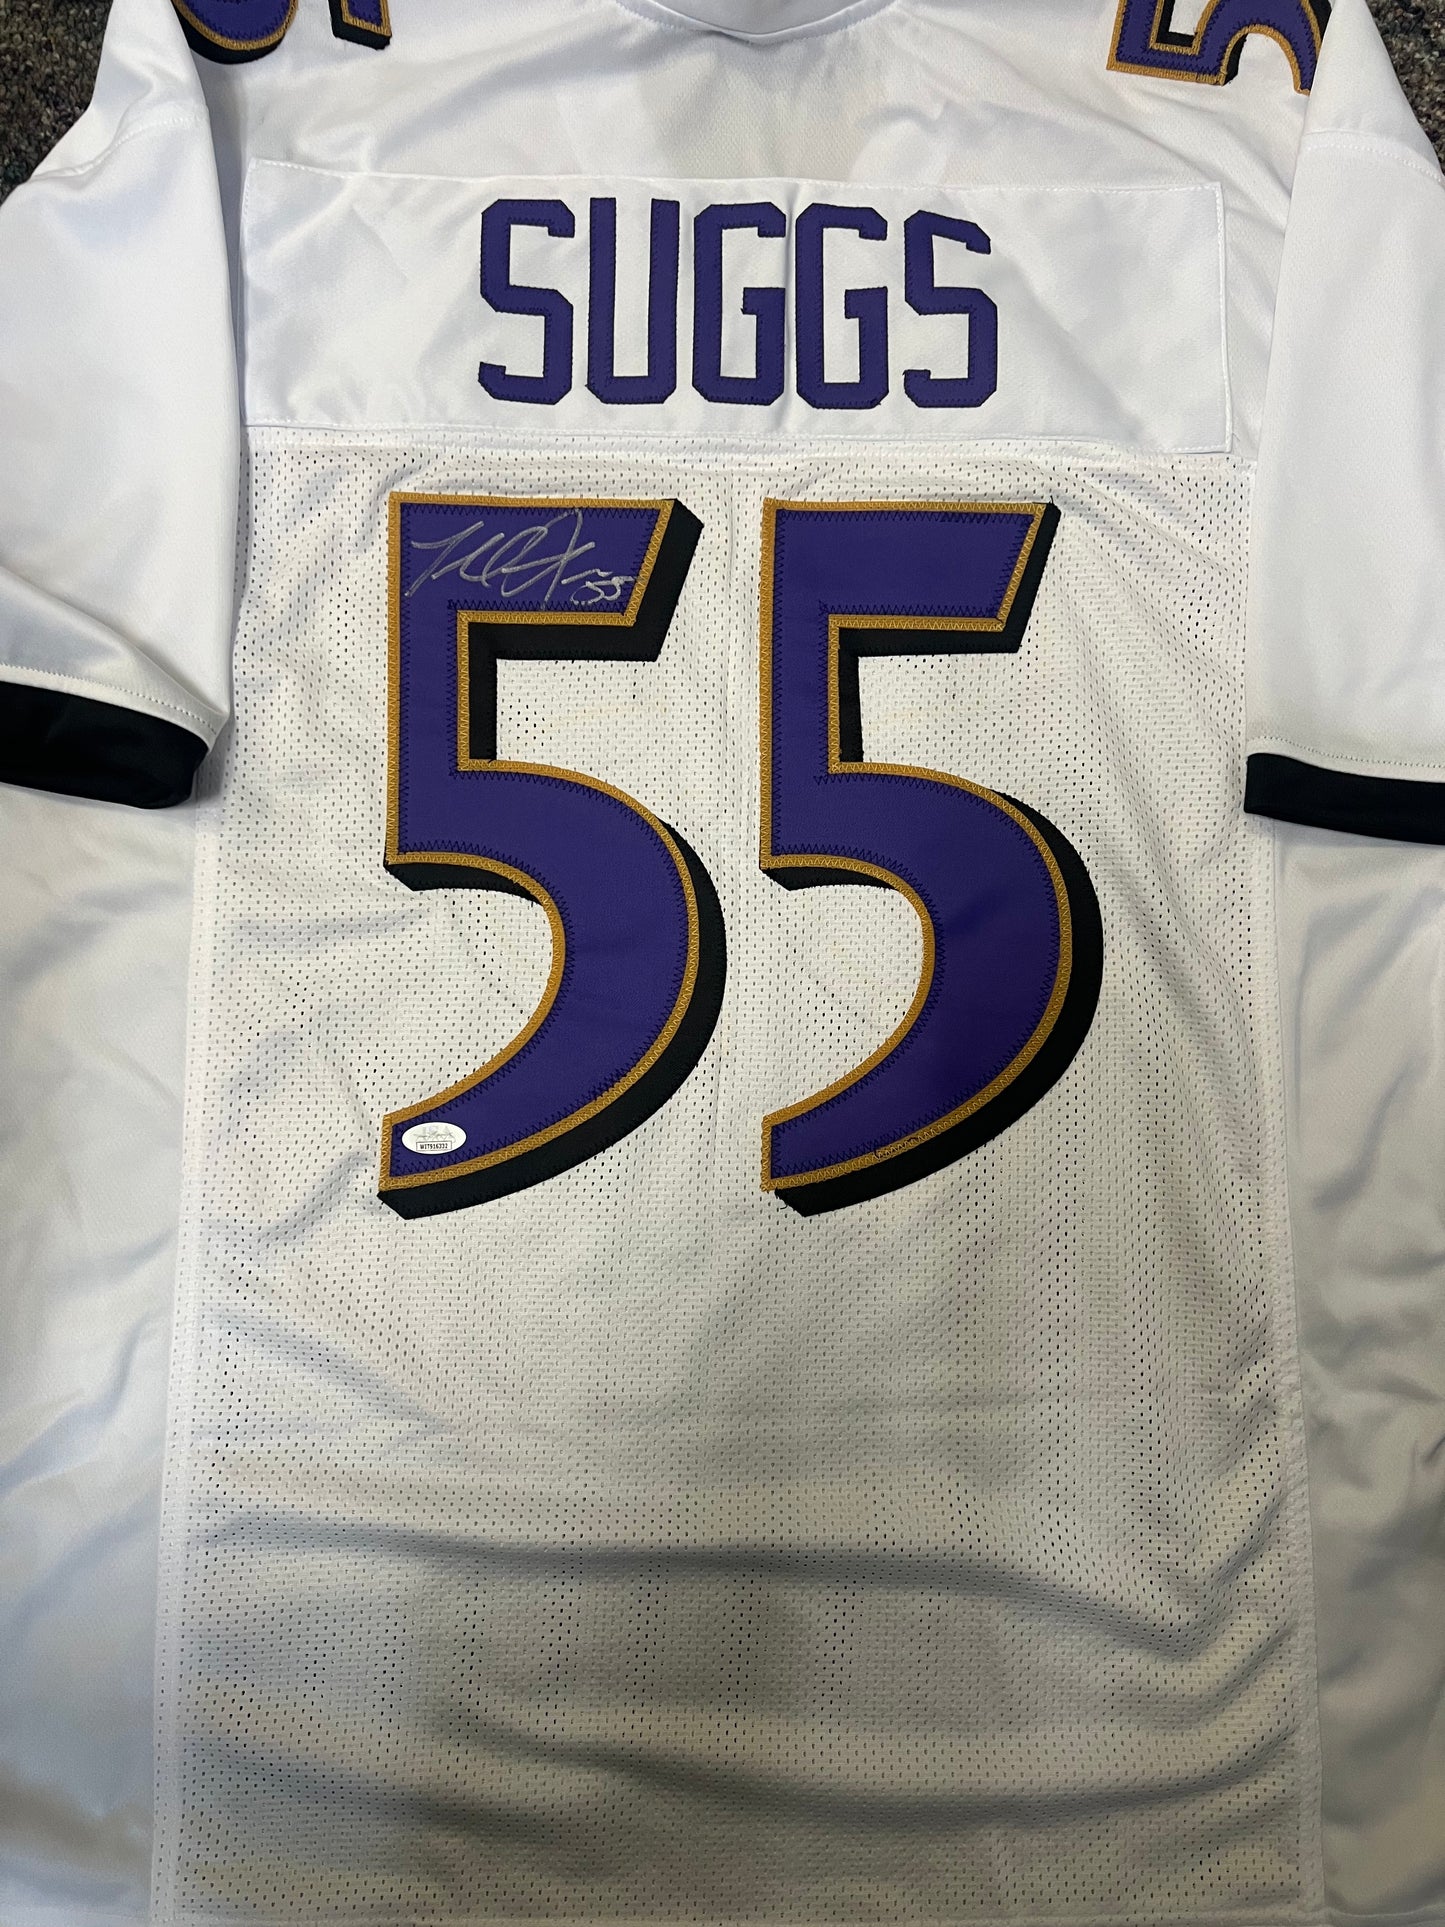 Baltimore Ravens Terrell Suggs Signed White Jersey with JSA COA